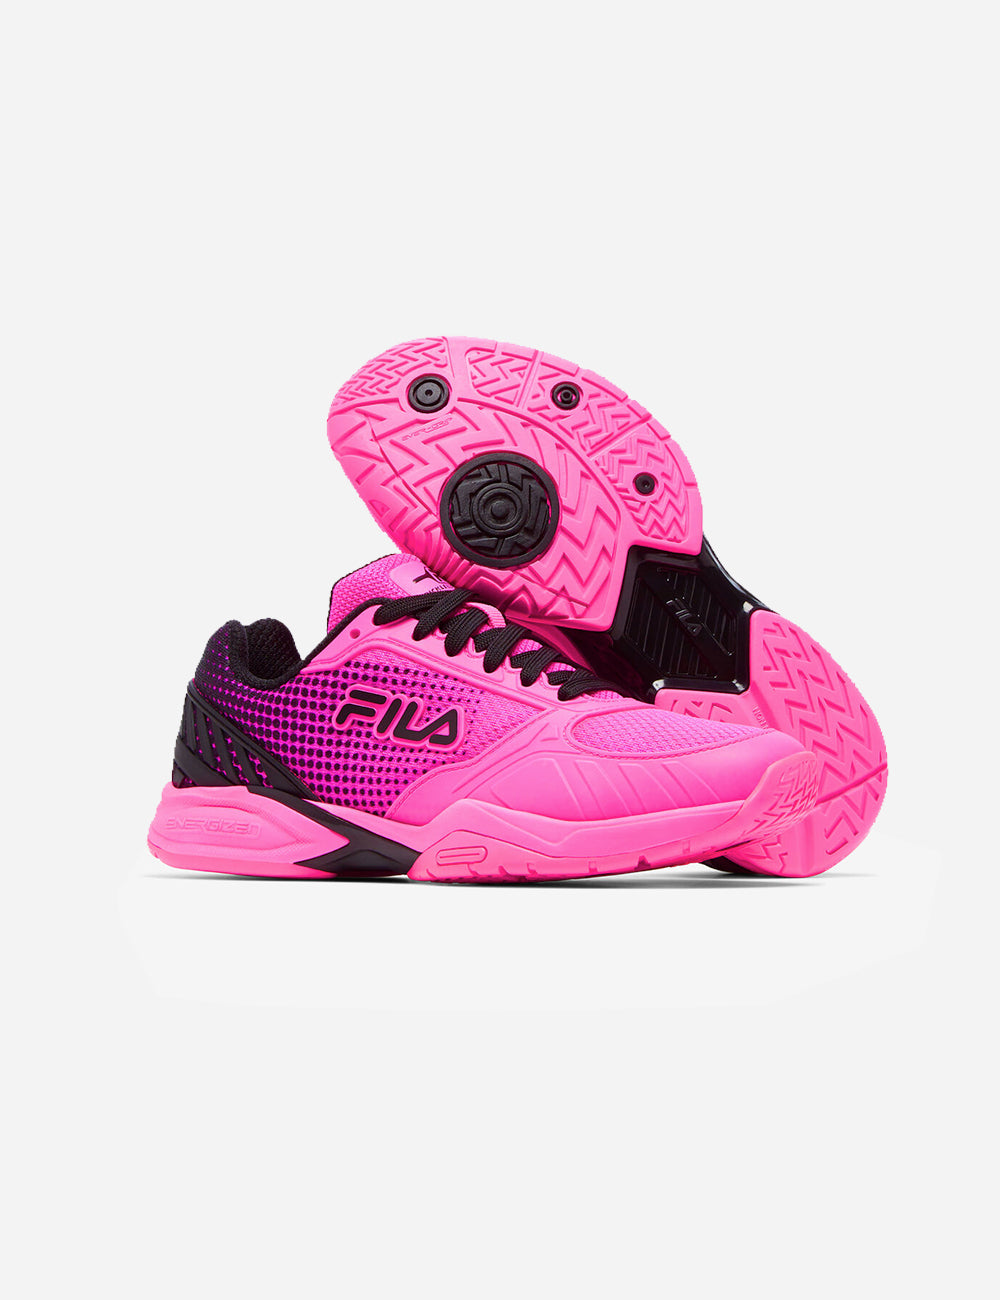 FILA Women's Volley Zone Shoes - Pink - Superstore